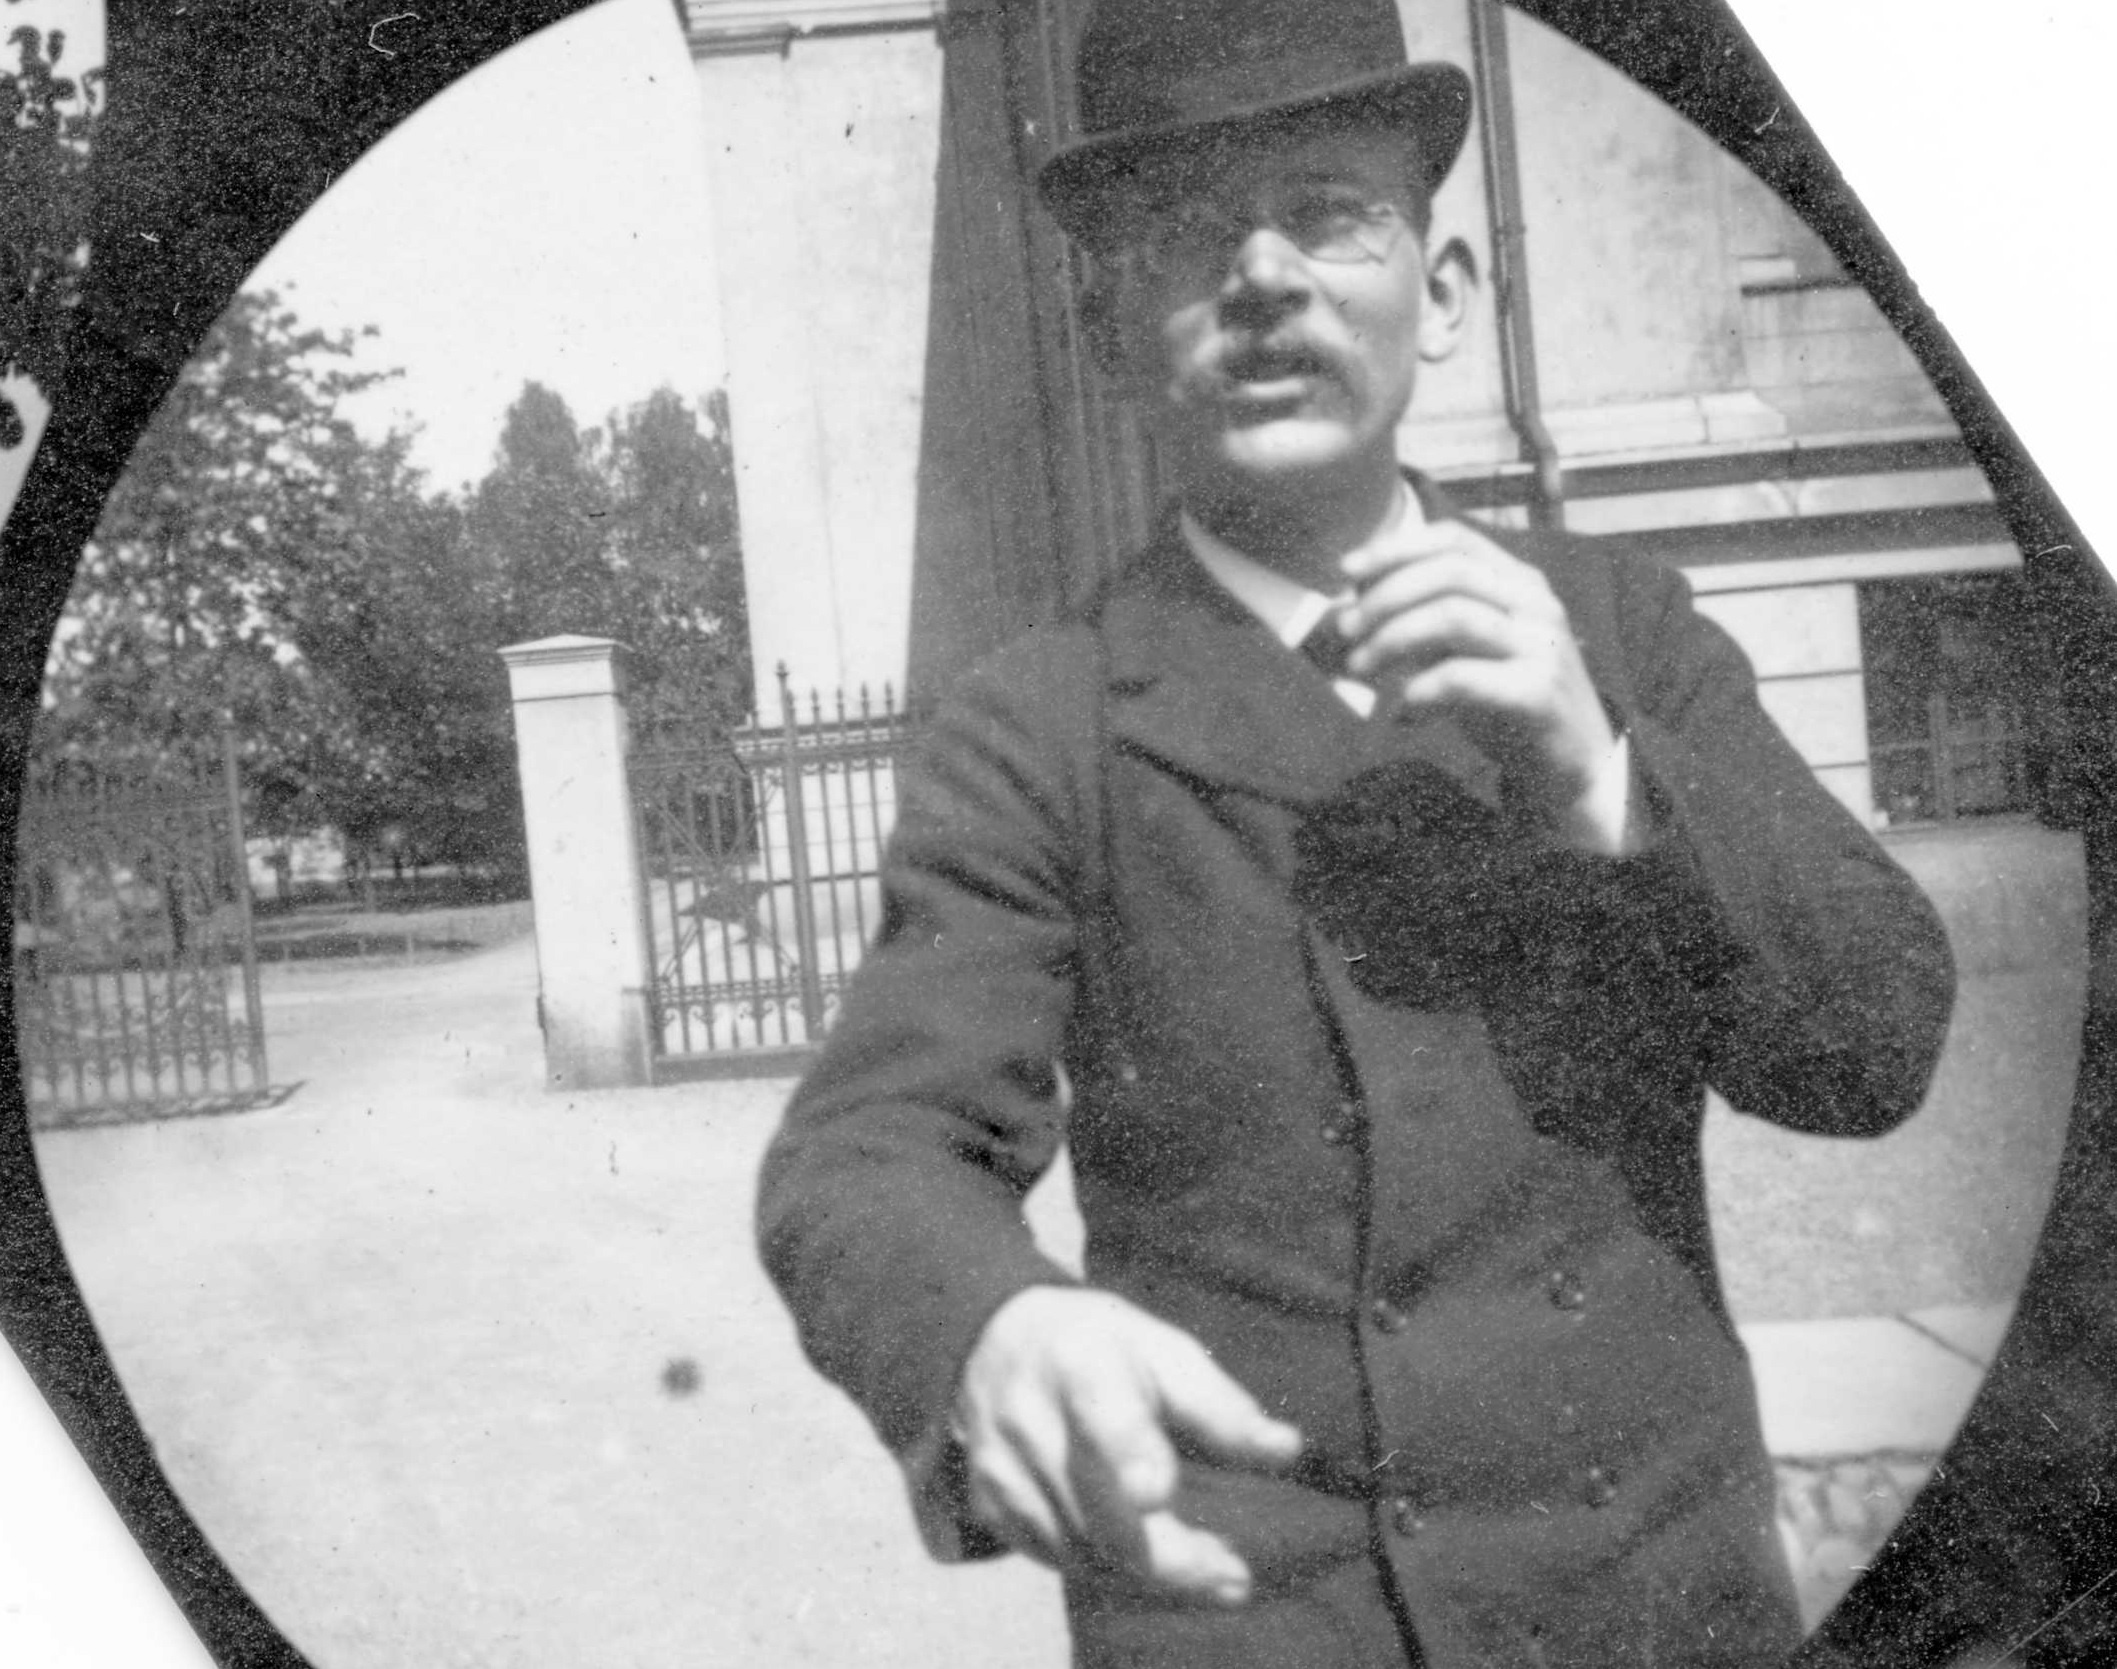 A round camera image shows a man in a top hat and a suit out for a walk.